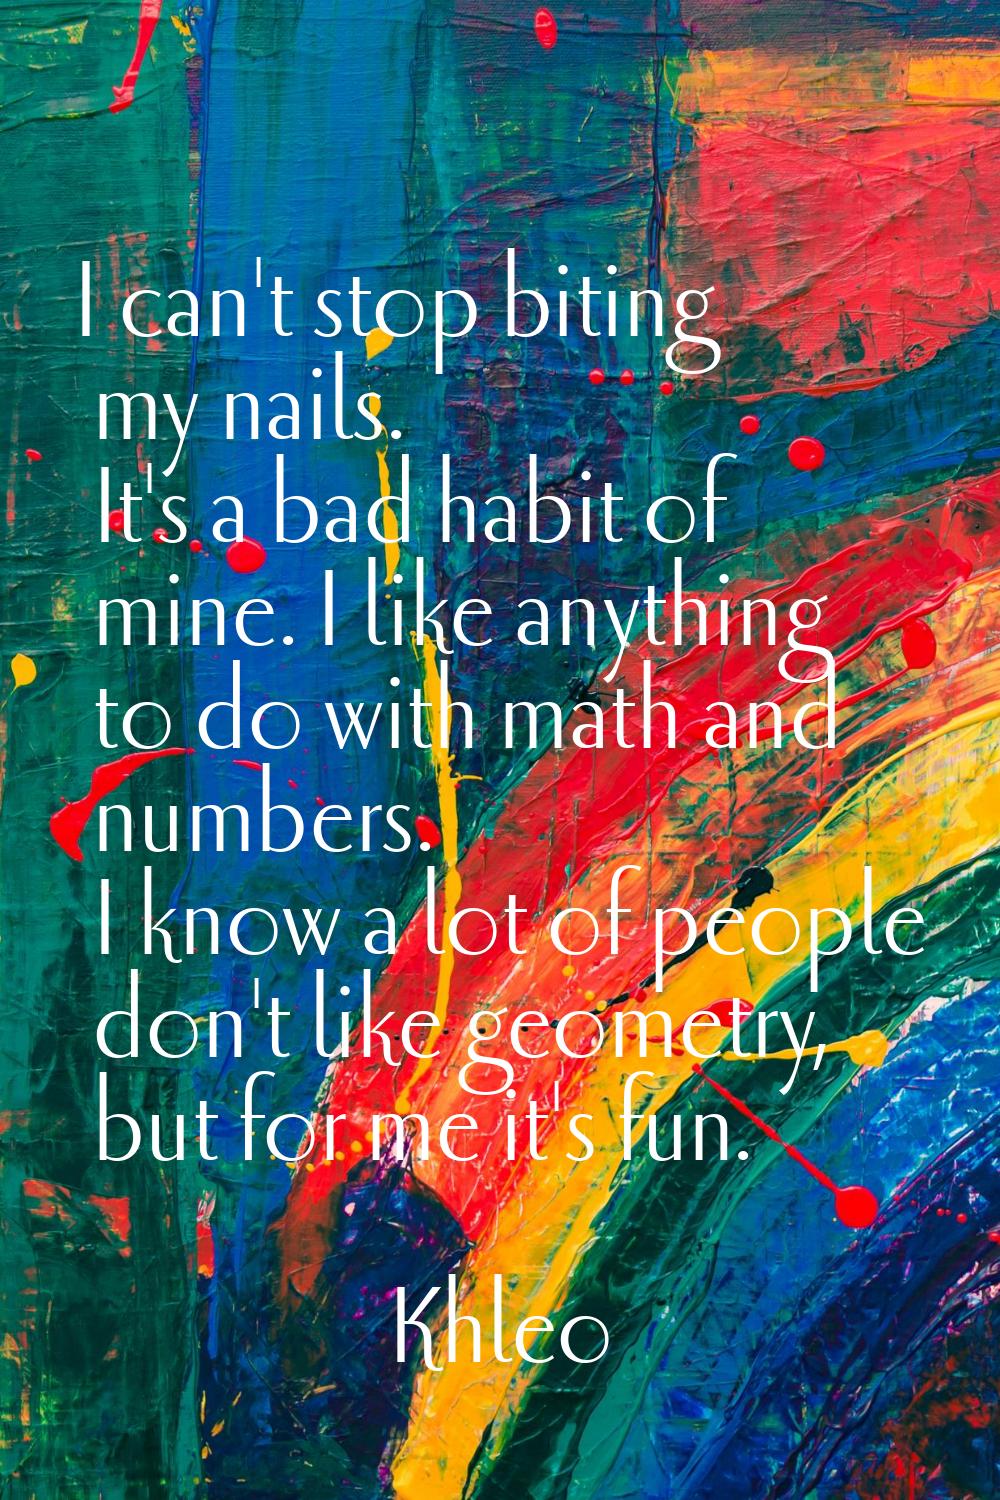 I can't stop biting my nails. It's a bad habit of mine. I like anything to do with math and numbers